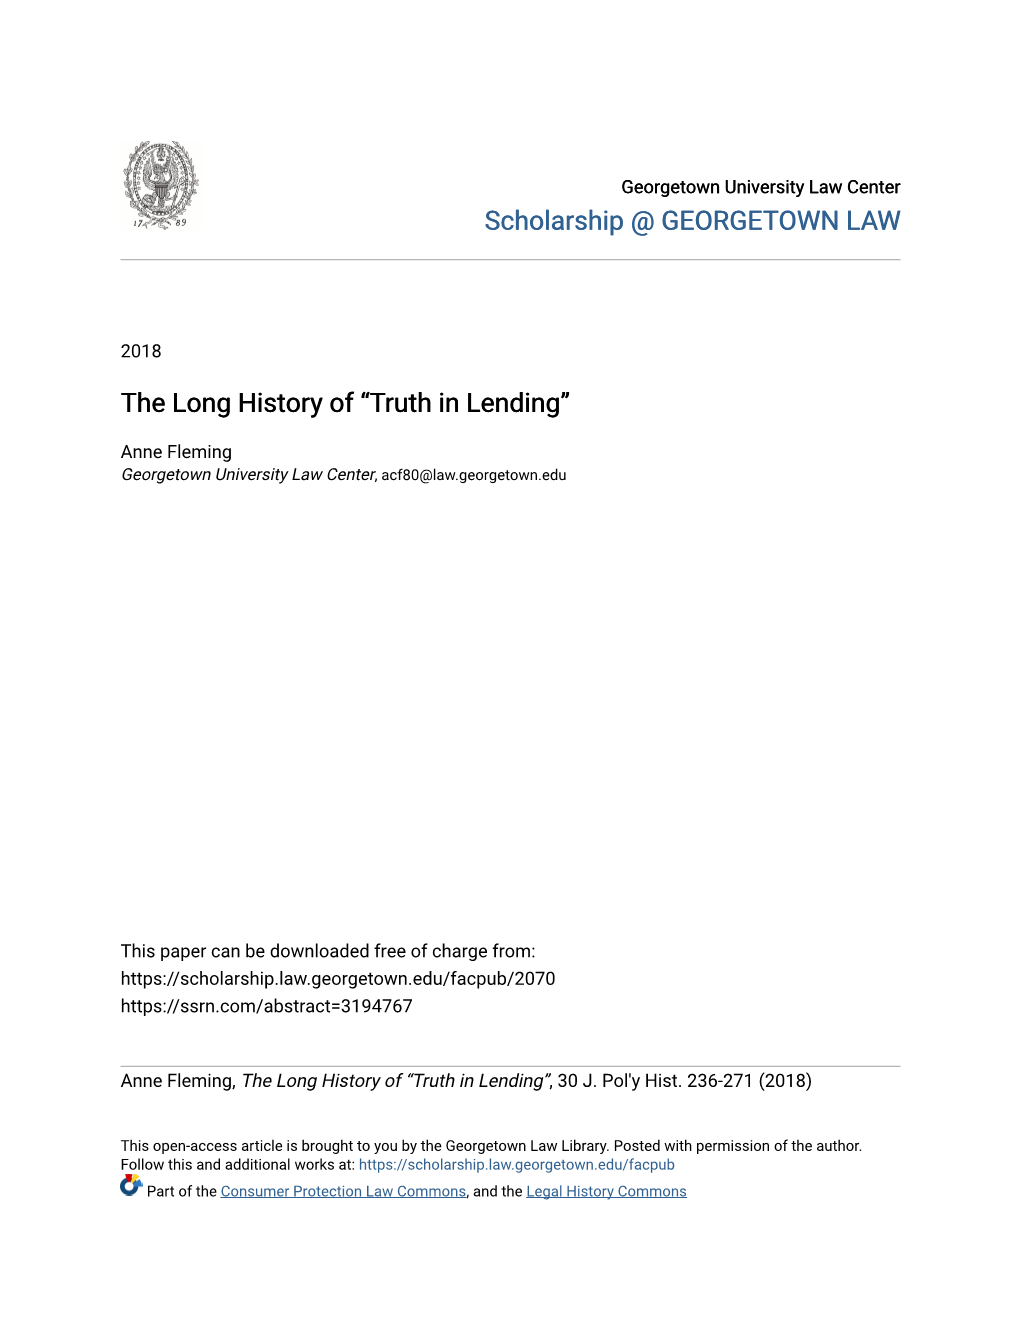 The Long History of “Truth in Lending”